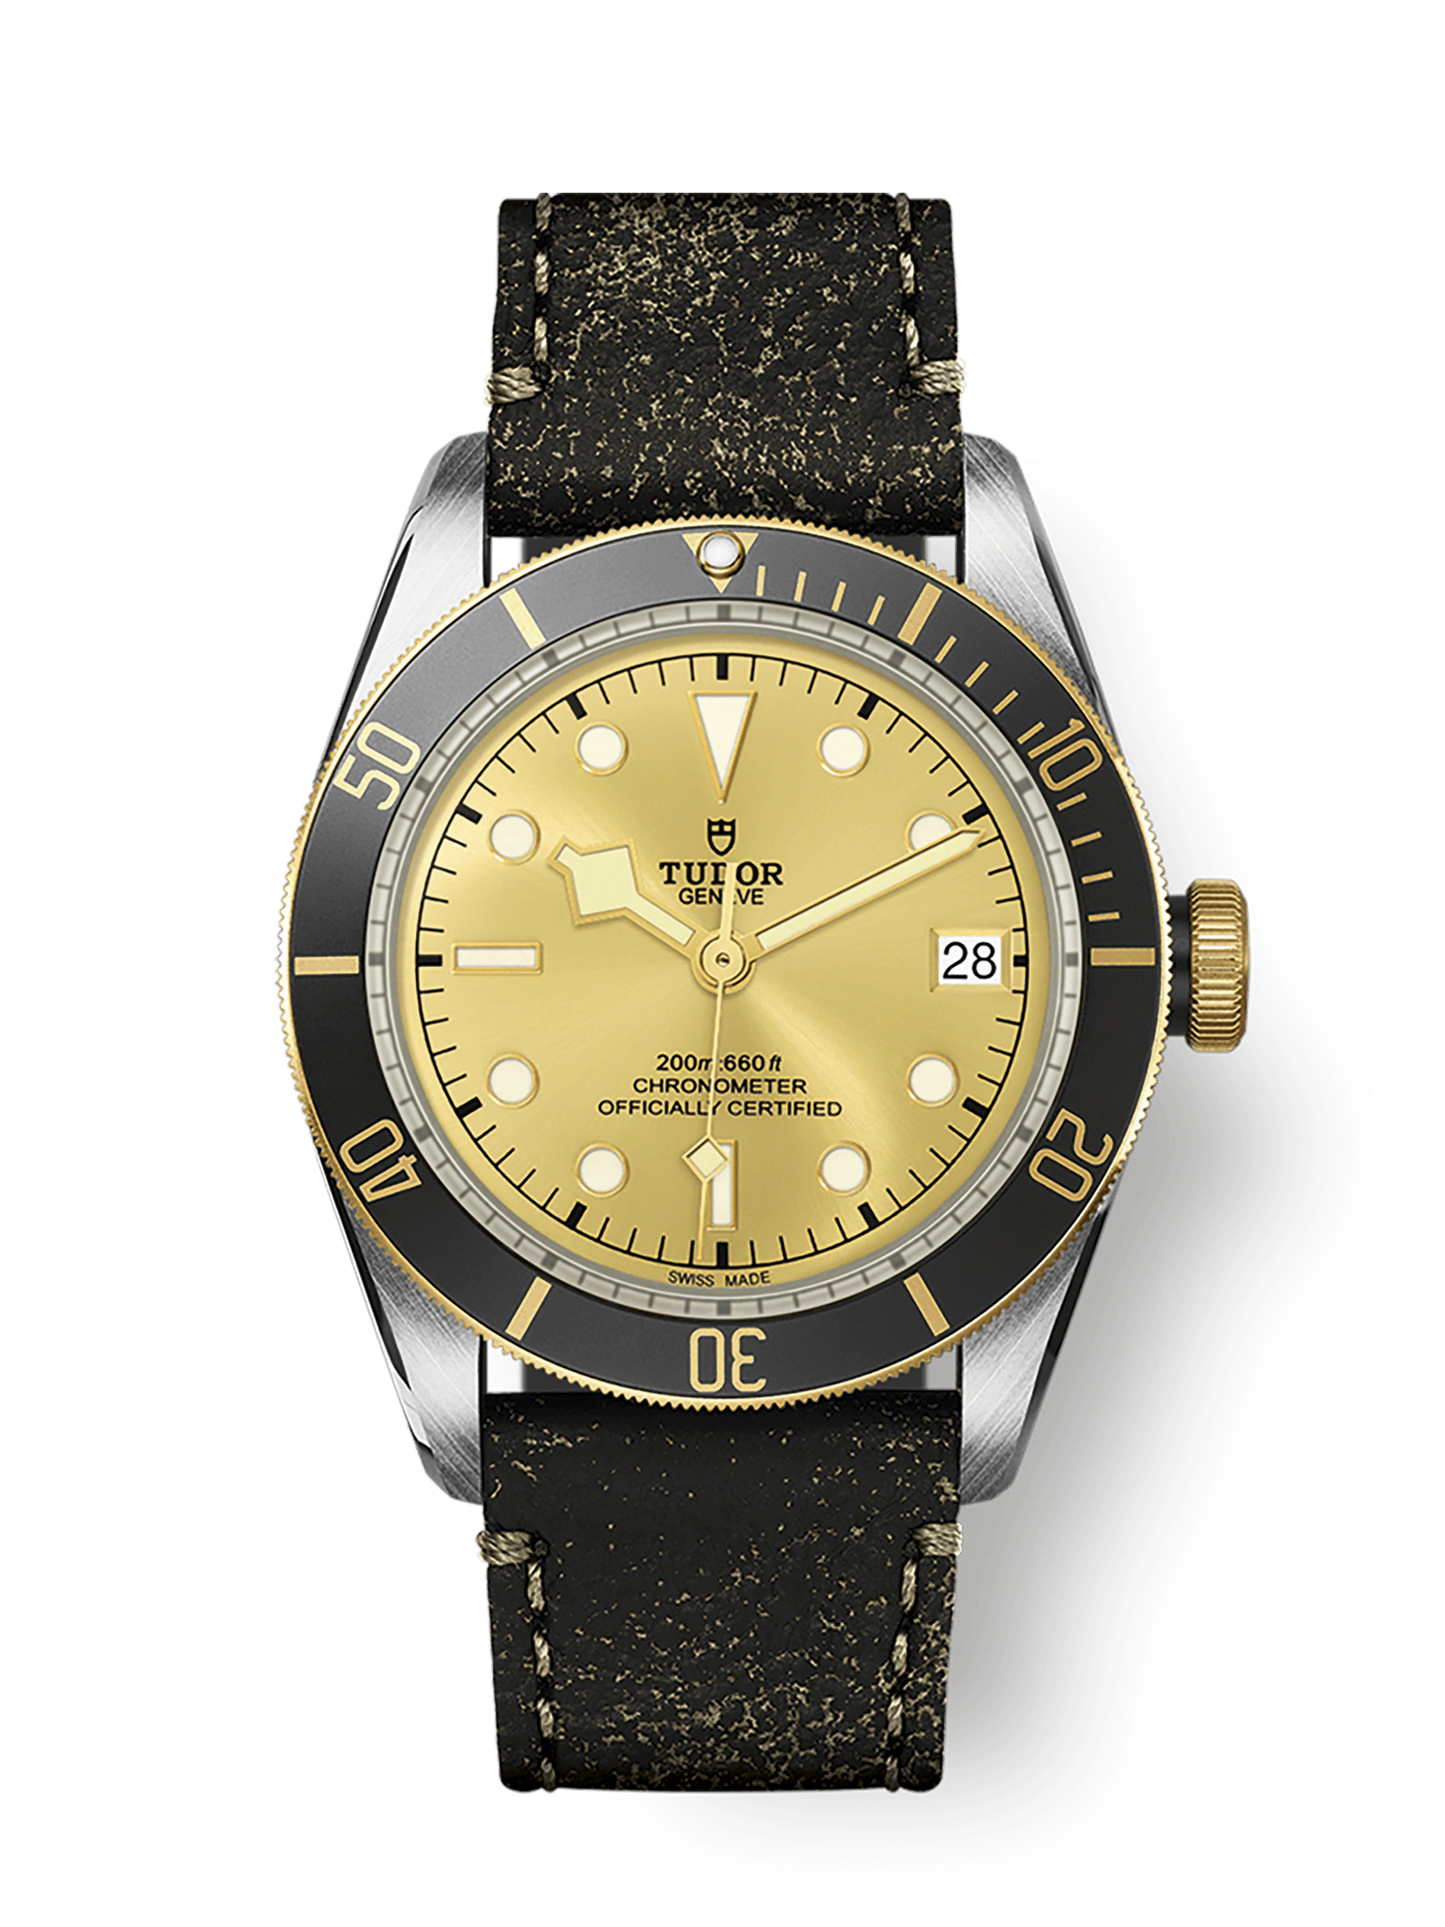 Tudor Black Bay S&G, 41mm, Stainless Steel and 18k Yellow Gold, Ref# M79733N-0003